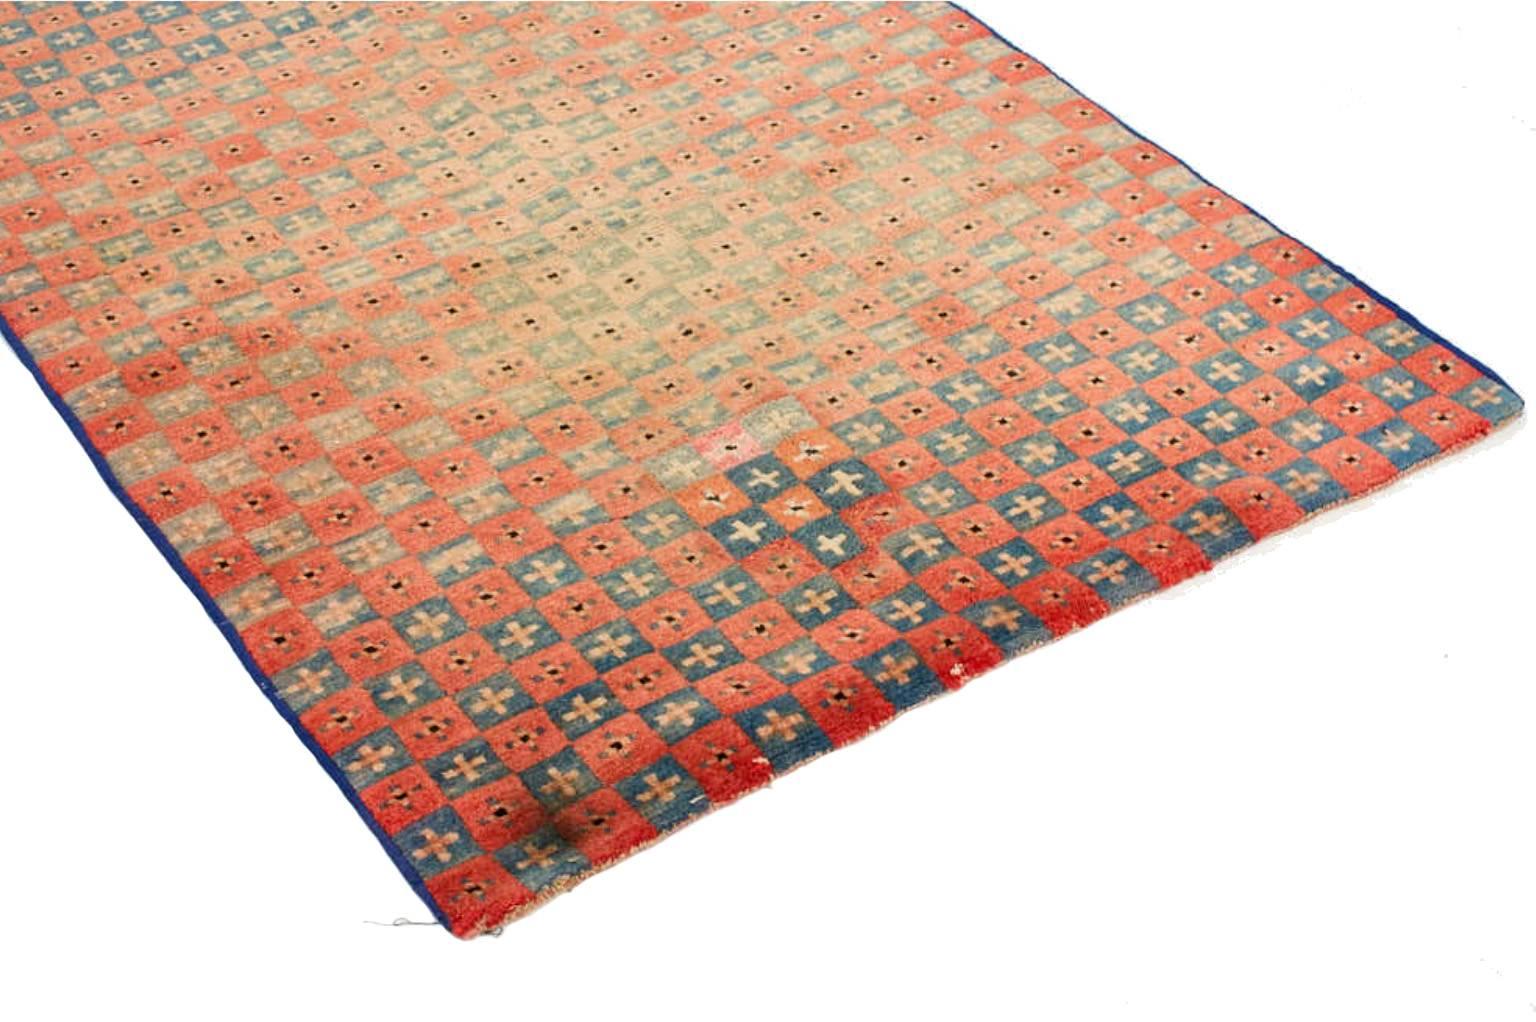 Individually selected by Madeline during her travels, this vintage Tibetan rug features an all-over checkerboard pattern rendered in blue, green and dusty rose hues. Handwoven from wool, nomadic artisans often created bold, geometric designs into